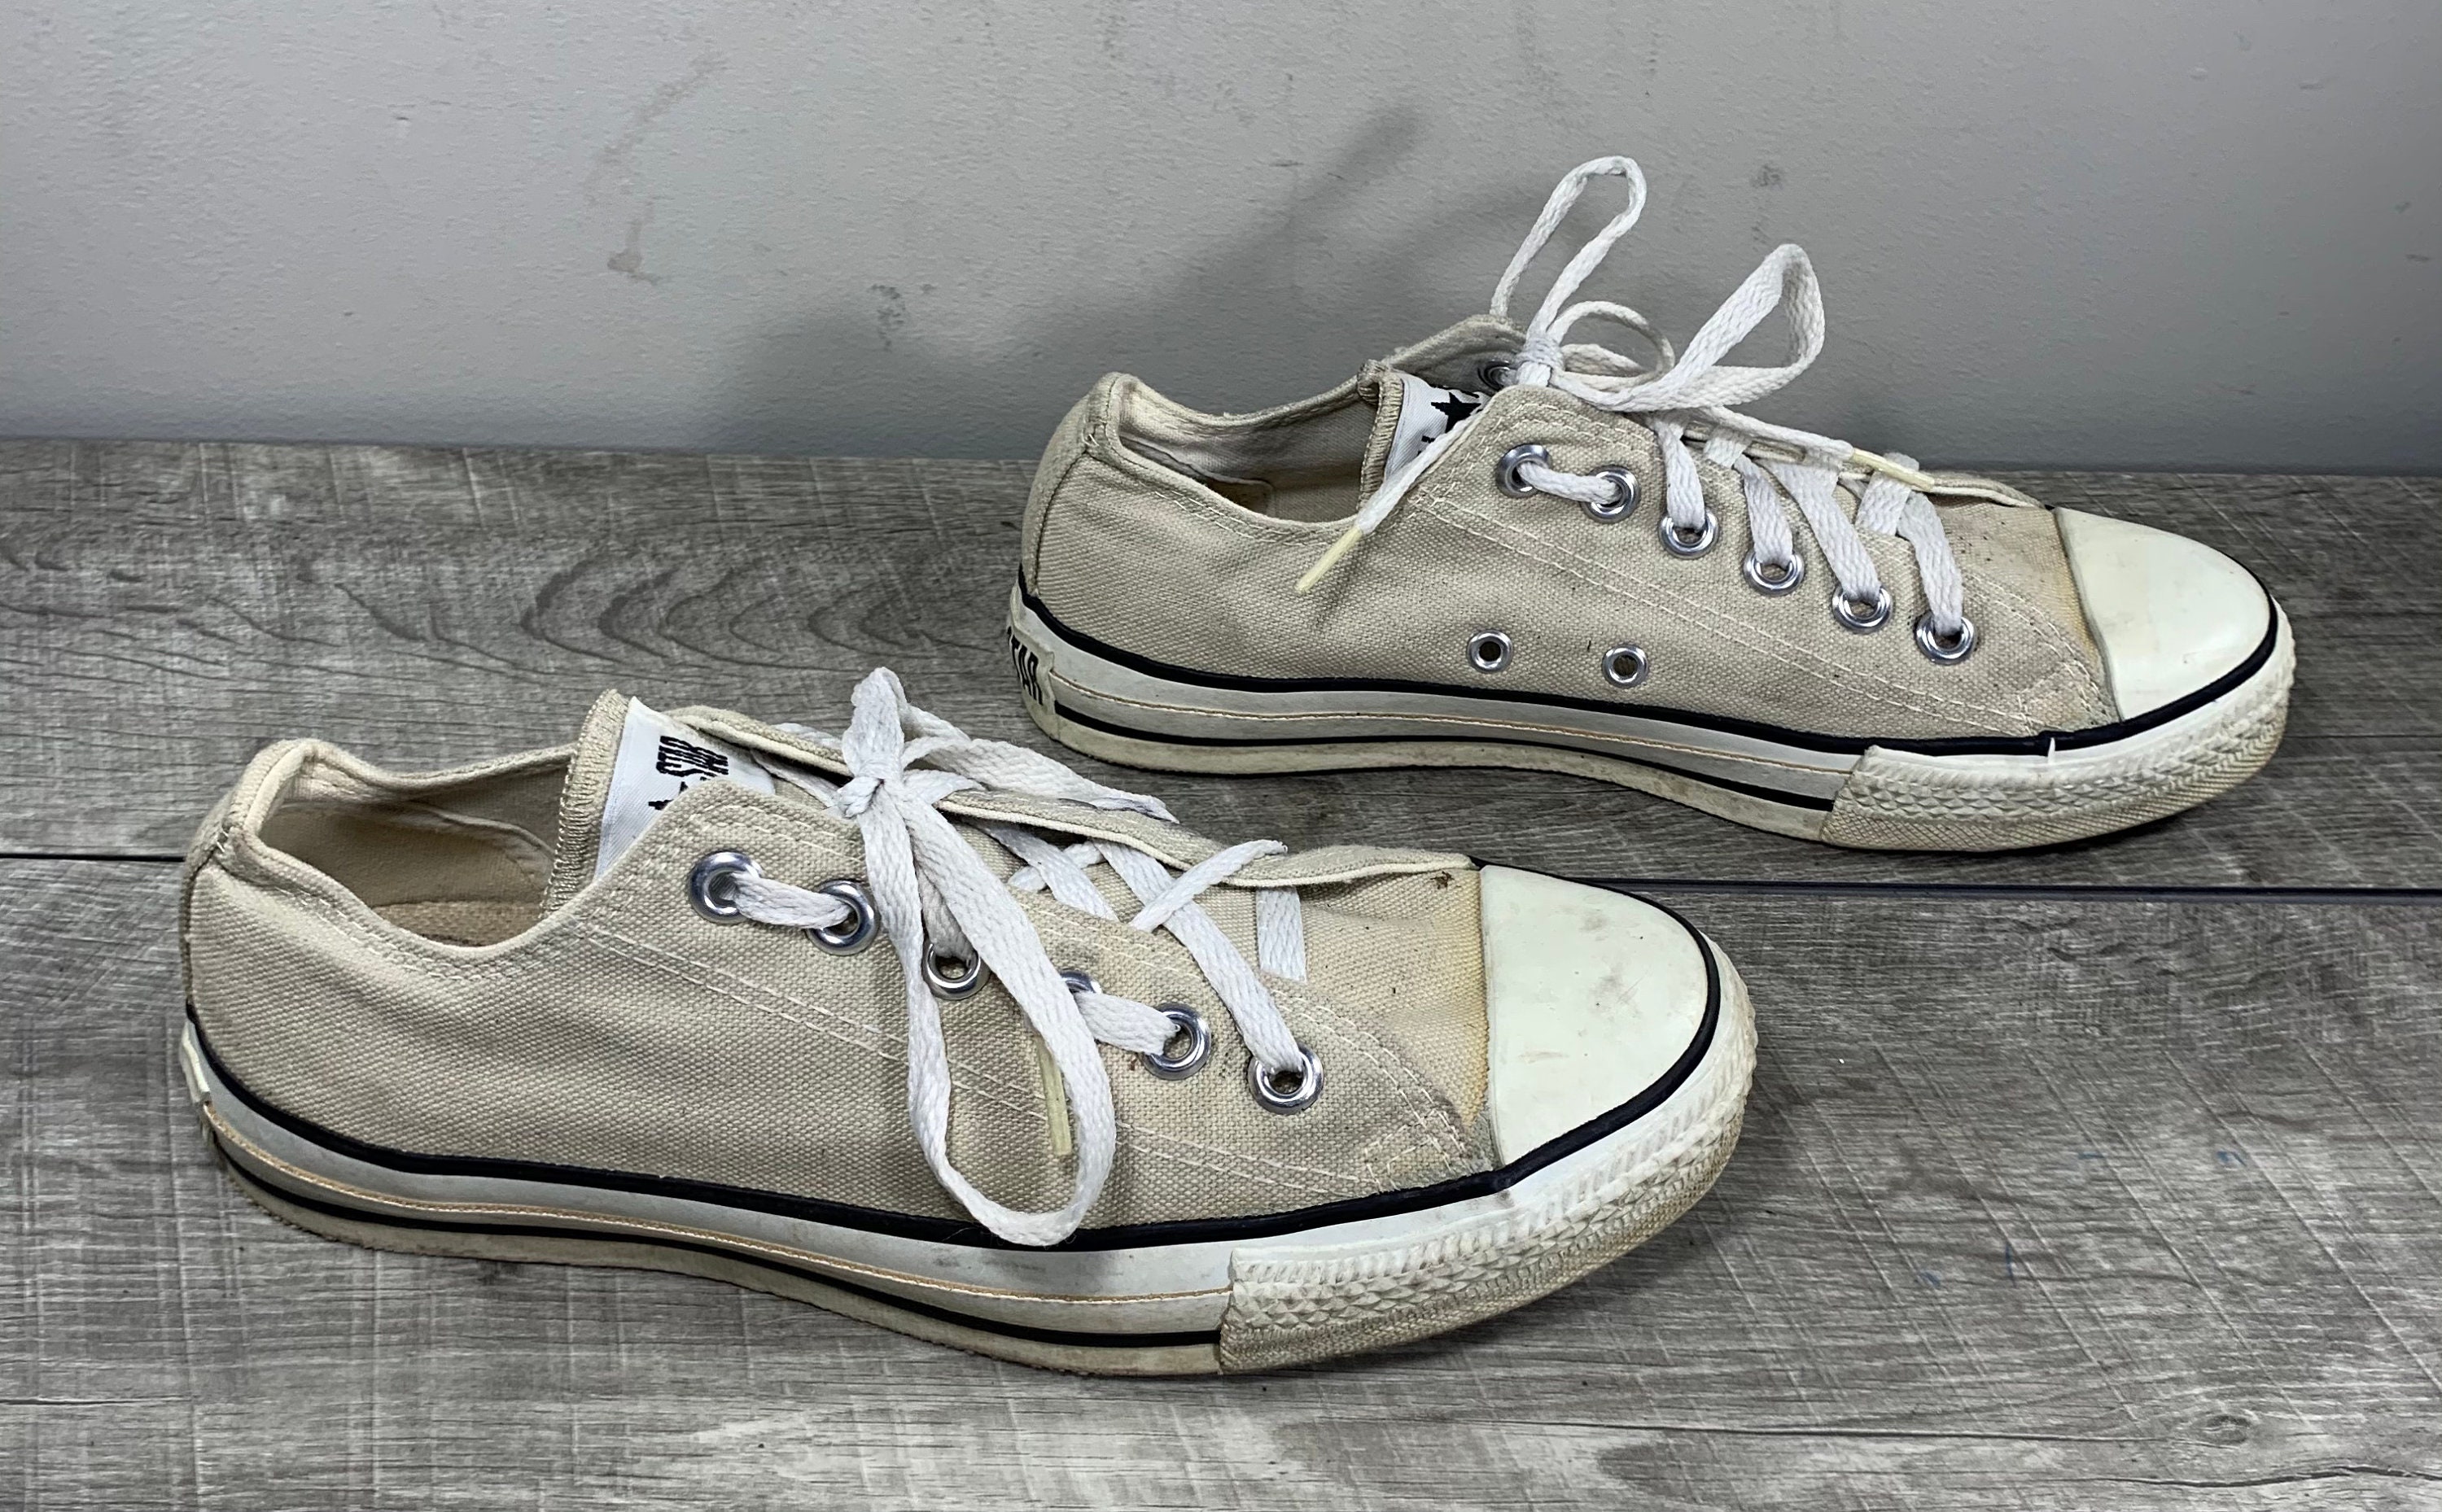 Male Cafe Kano Vintage CONVERSE All Star Gray Made in USA Low Top Sneaker - Etsy